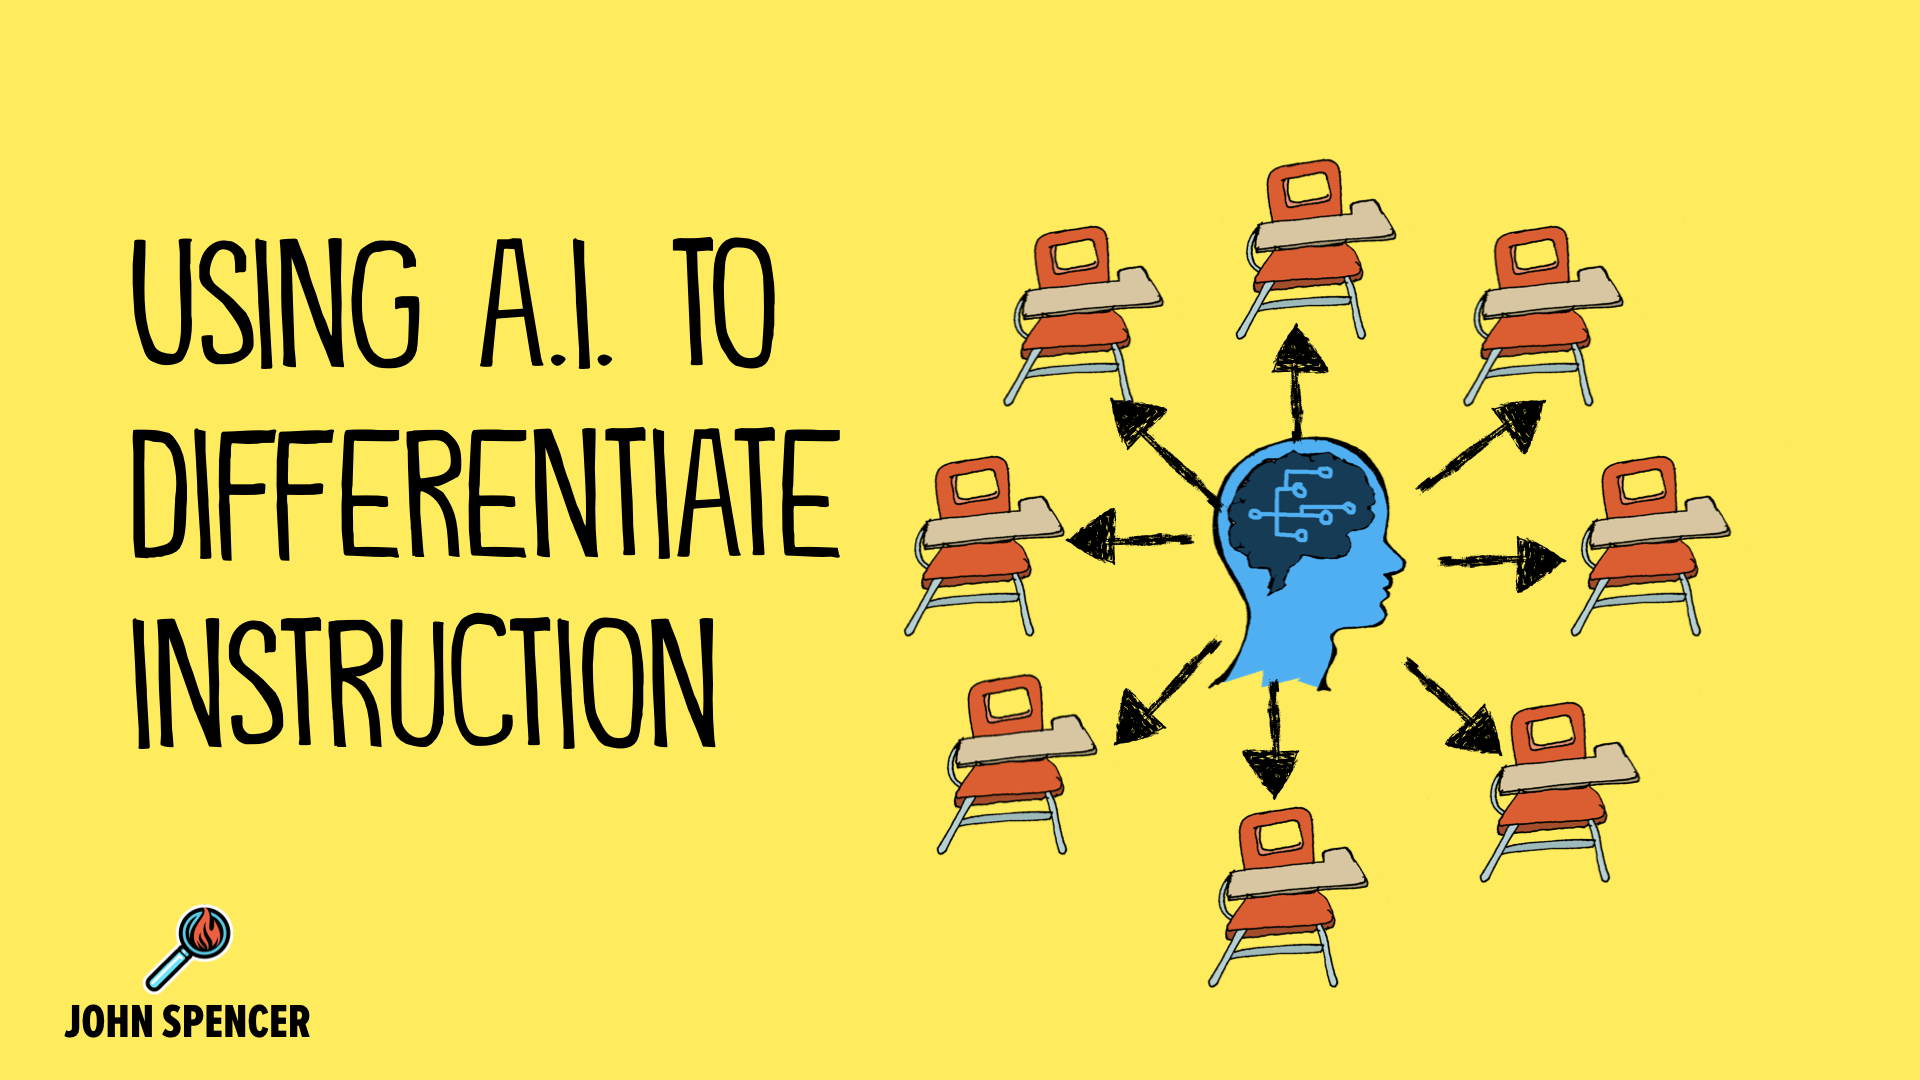 5 Ways to Leverage A.I. for Student Supports and Scaffolds